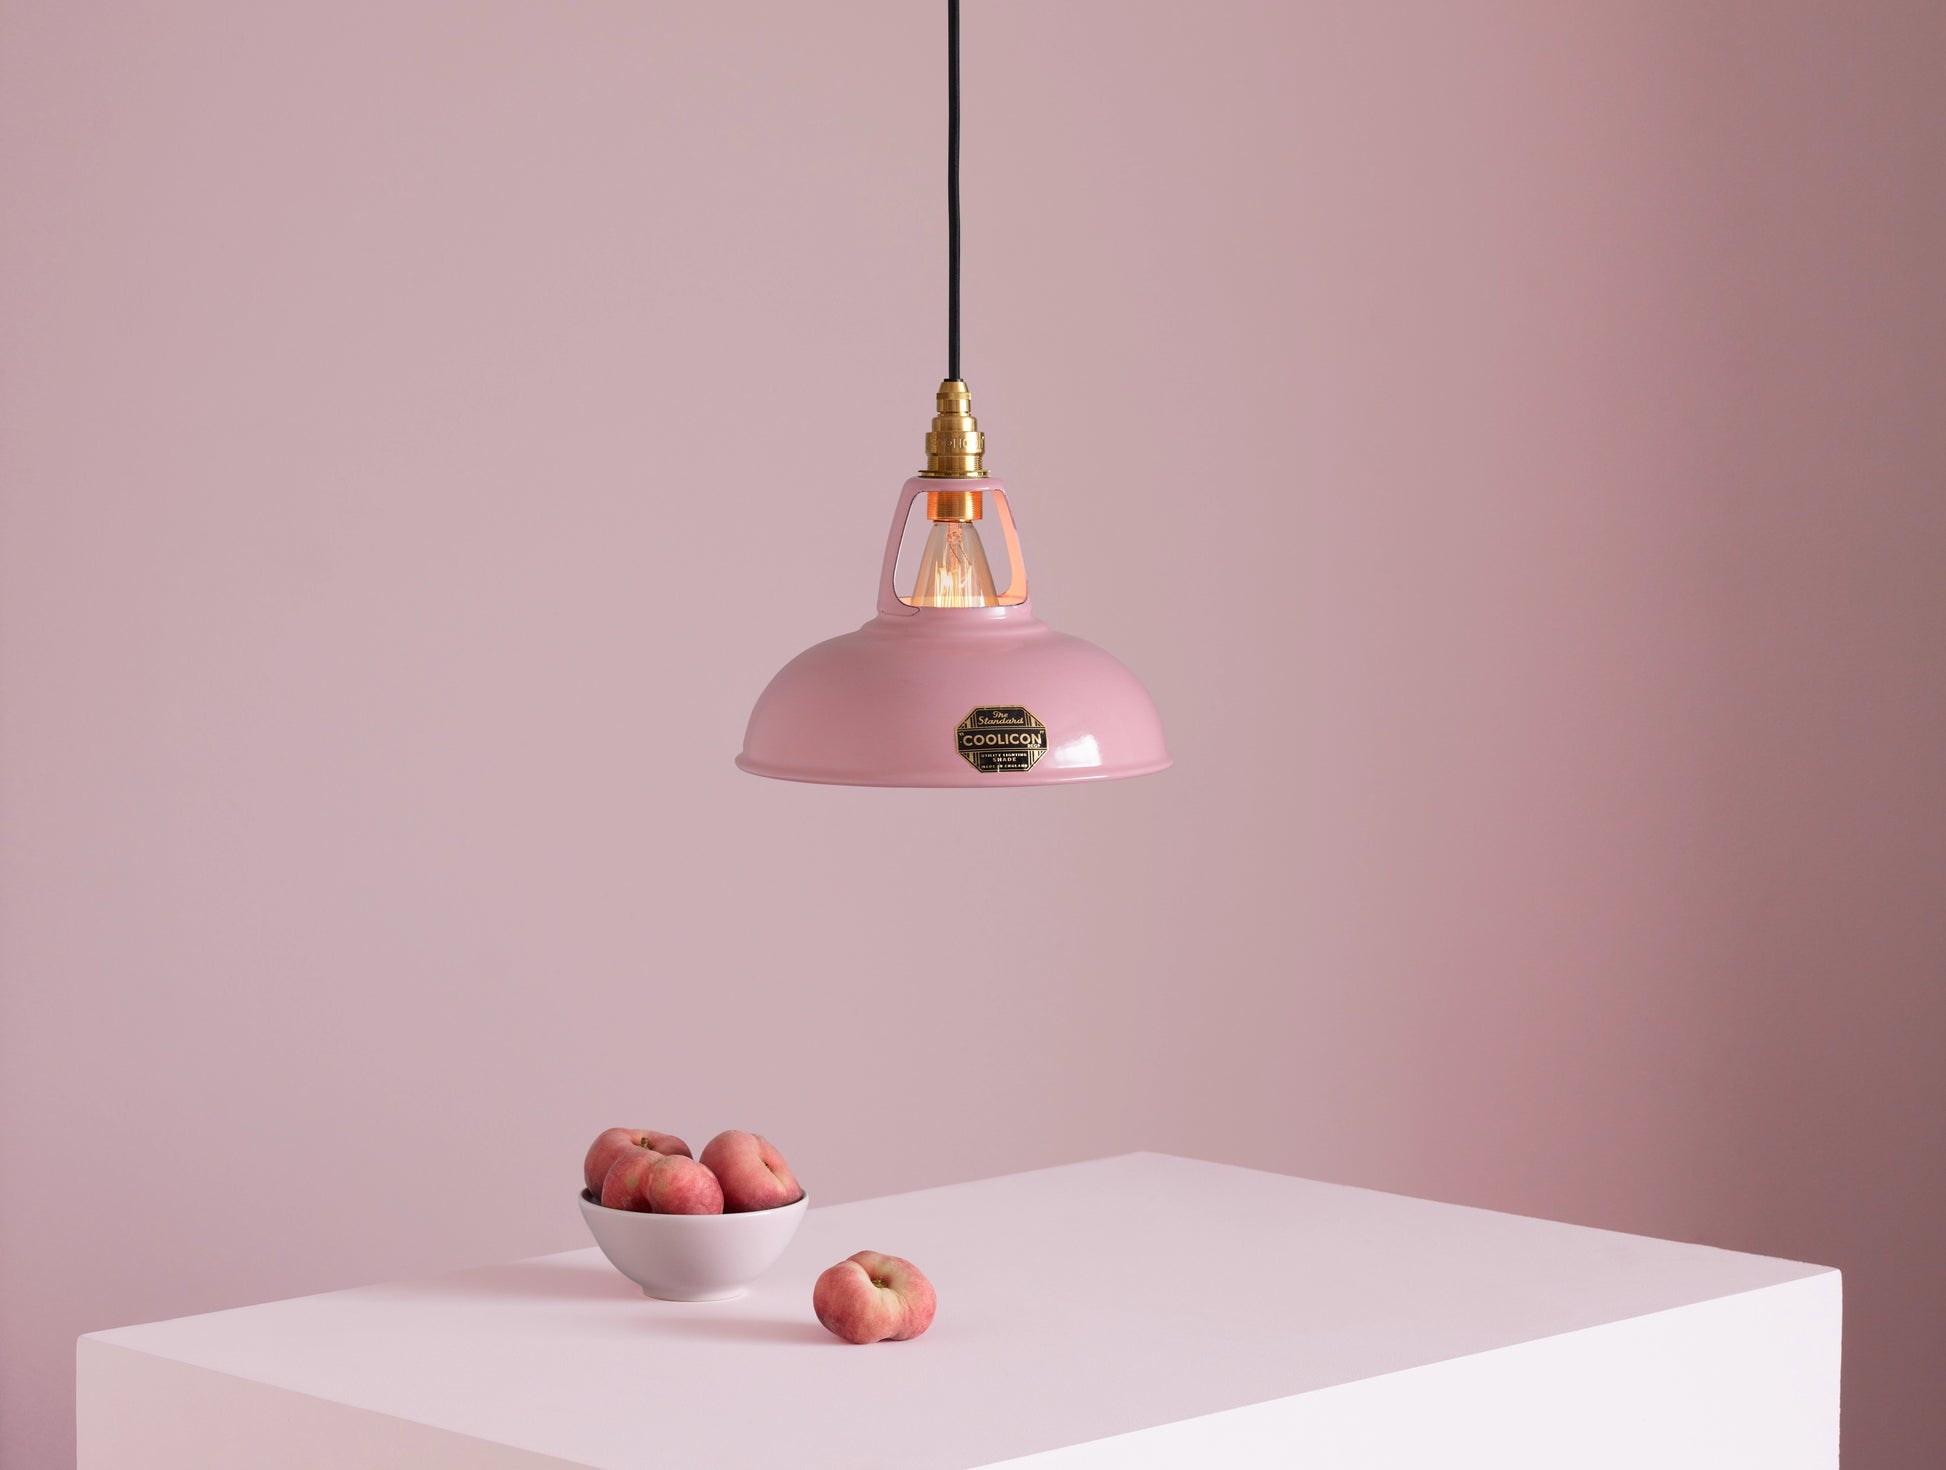 A Coolicon Powder Pink lampshade with a Porcelain pendant set hanging above a plinth with a bowl of flat peaches.